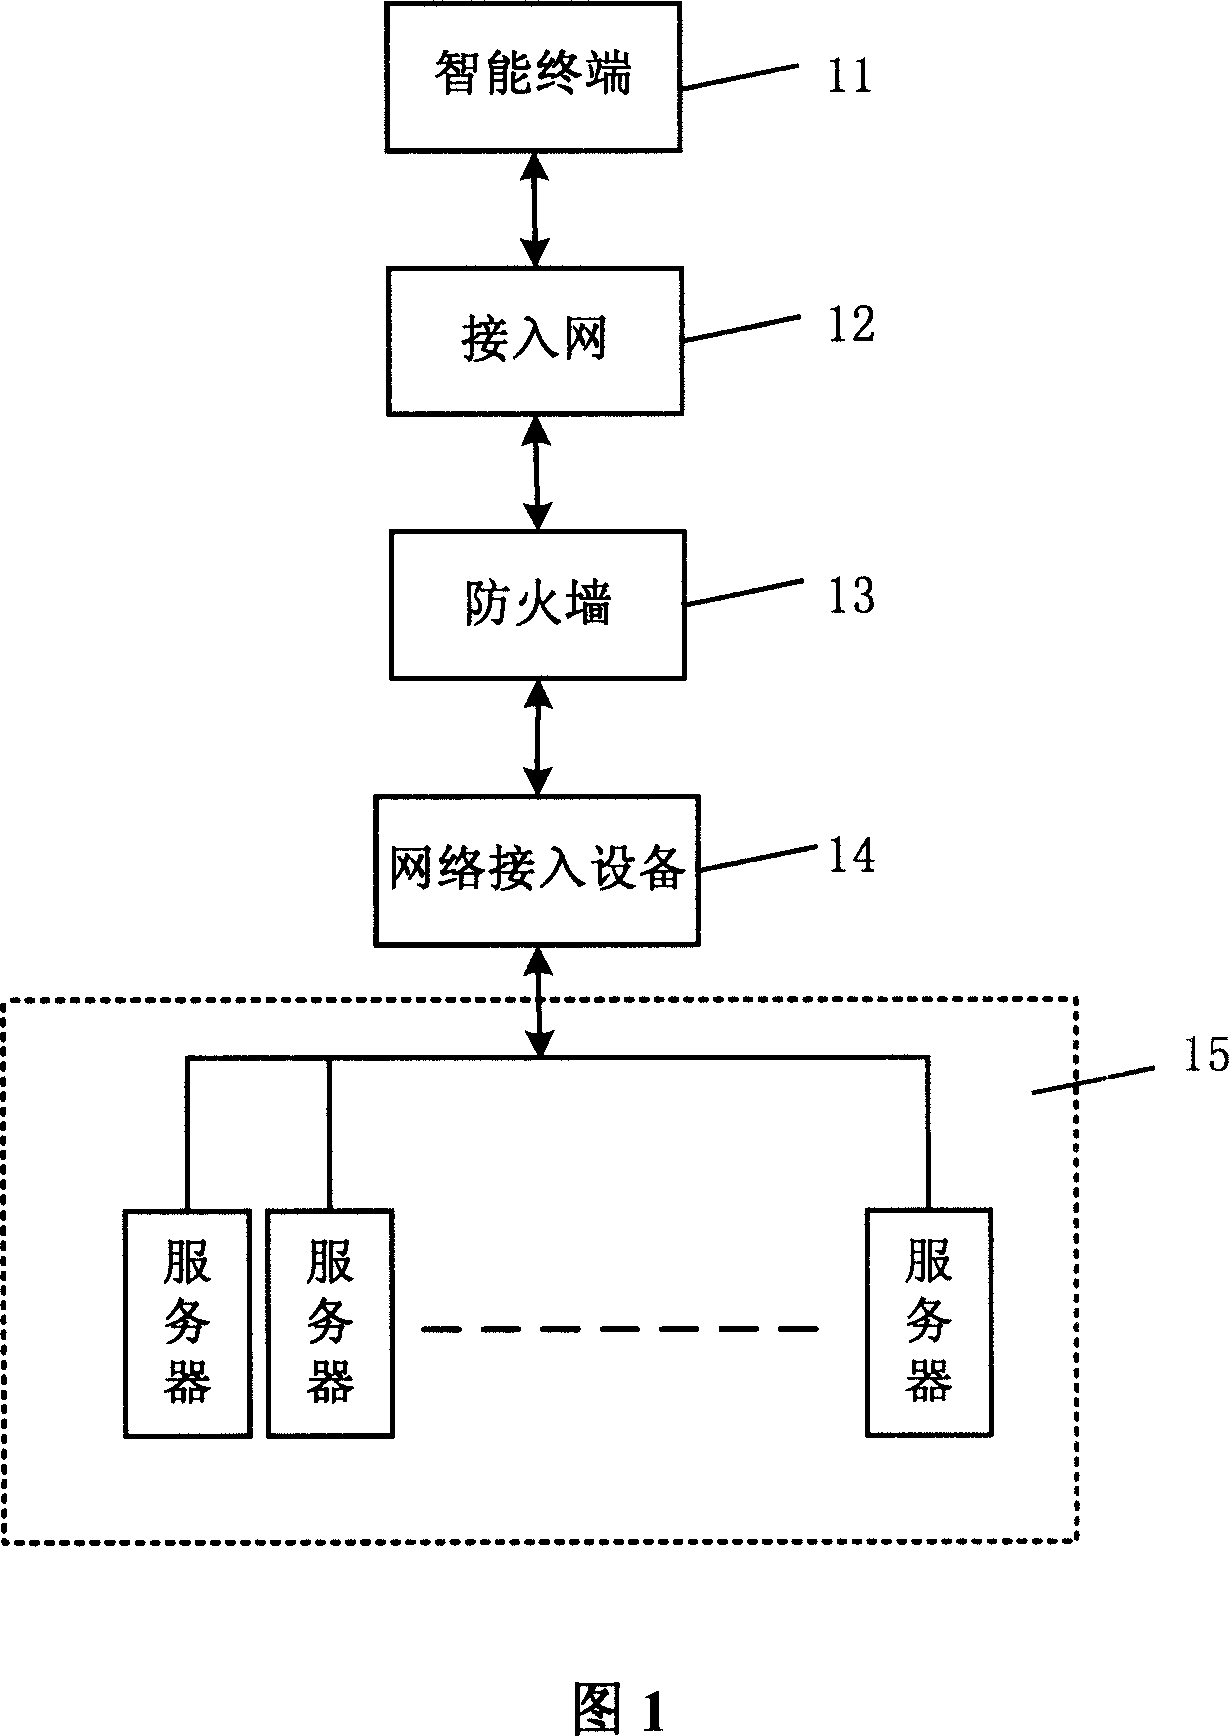 Network structure-based intelligent terminal application system